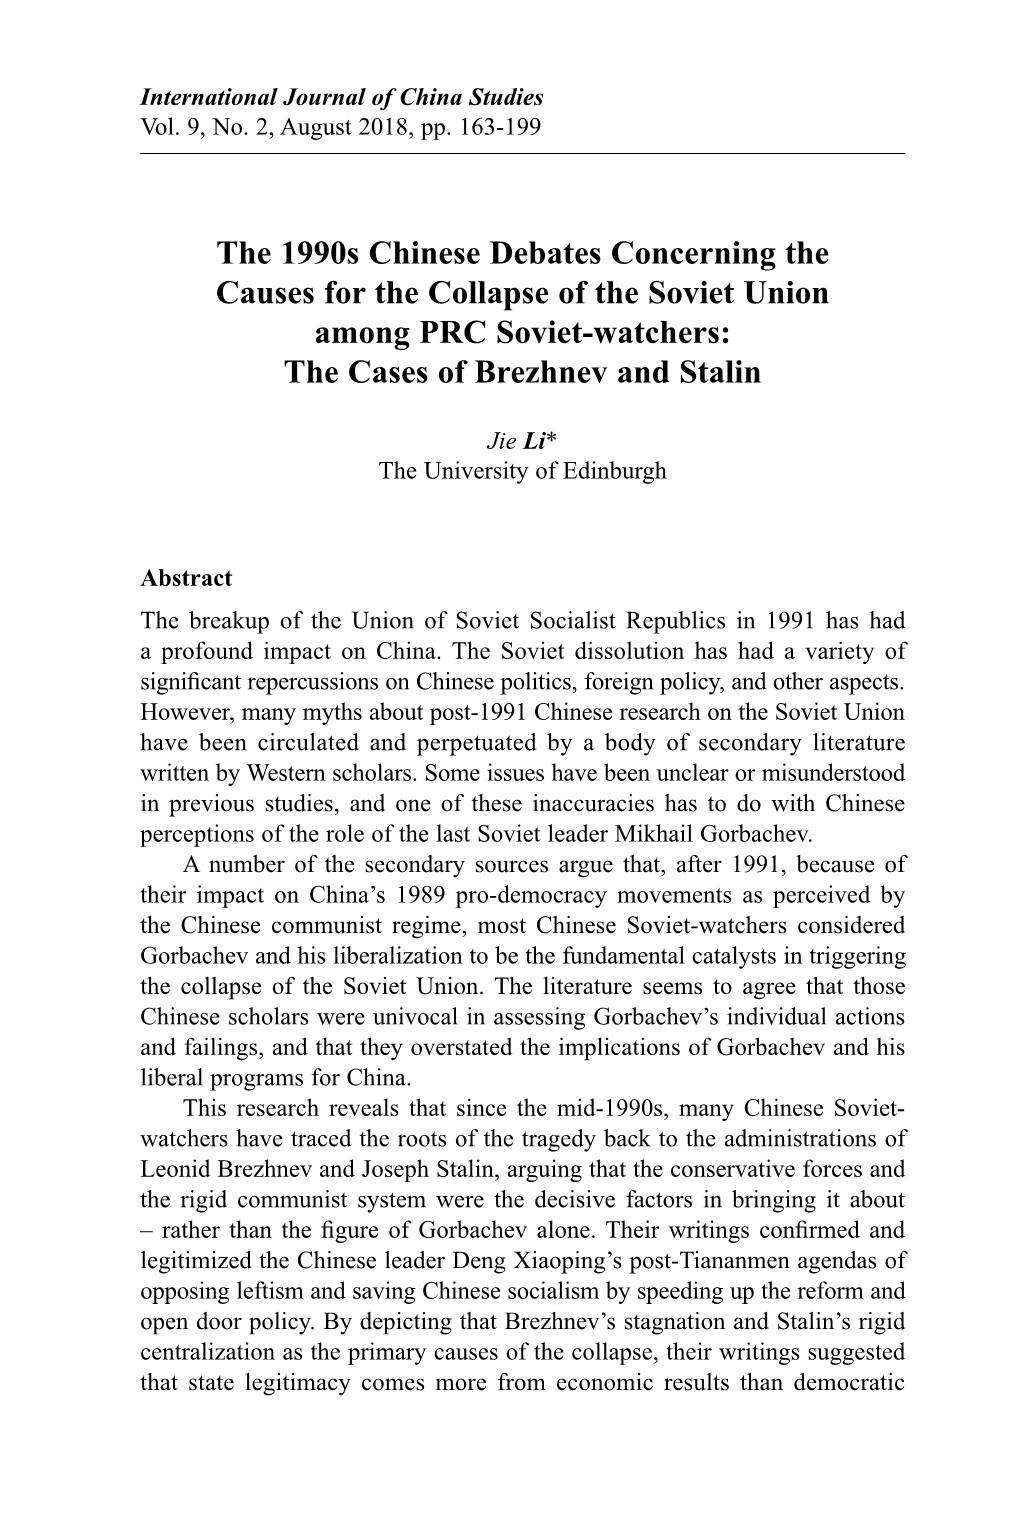 Views of Existing Scholarship on Chinese Debates Concerning Gorbachev and the Soviet Union